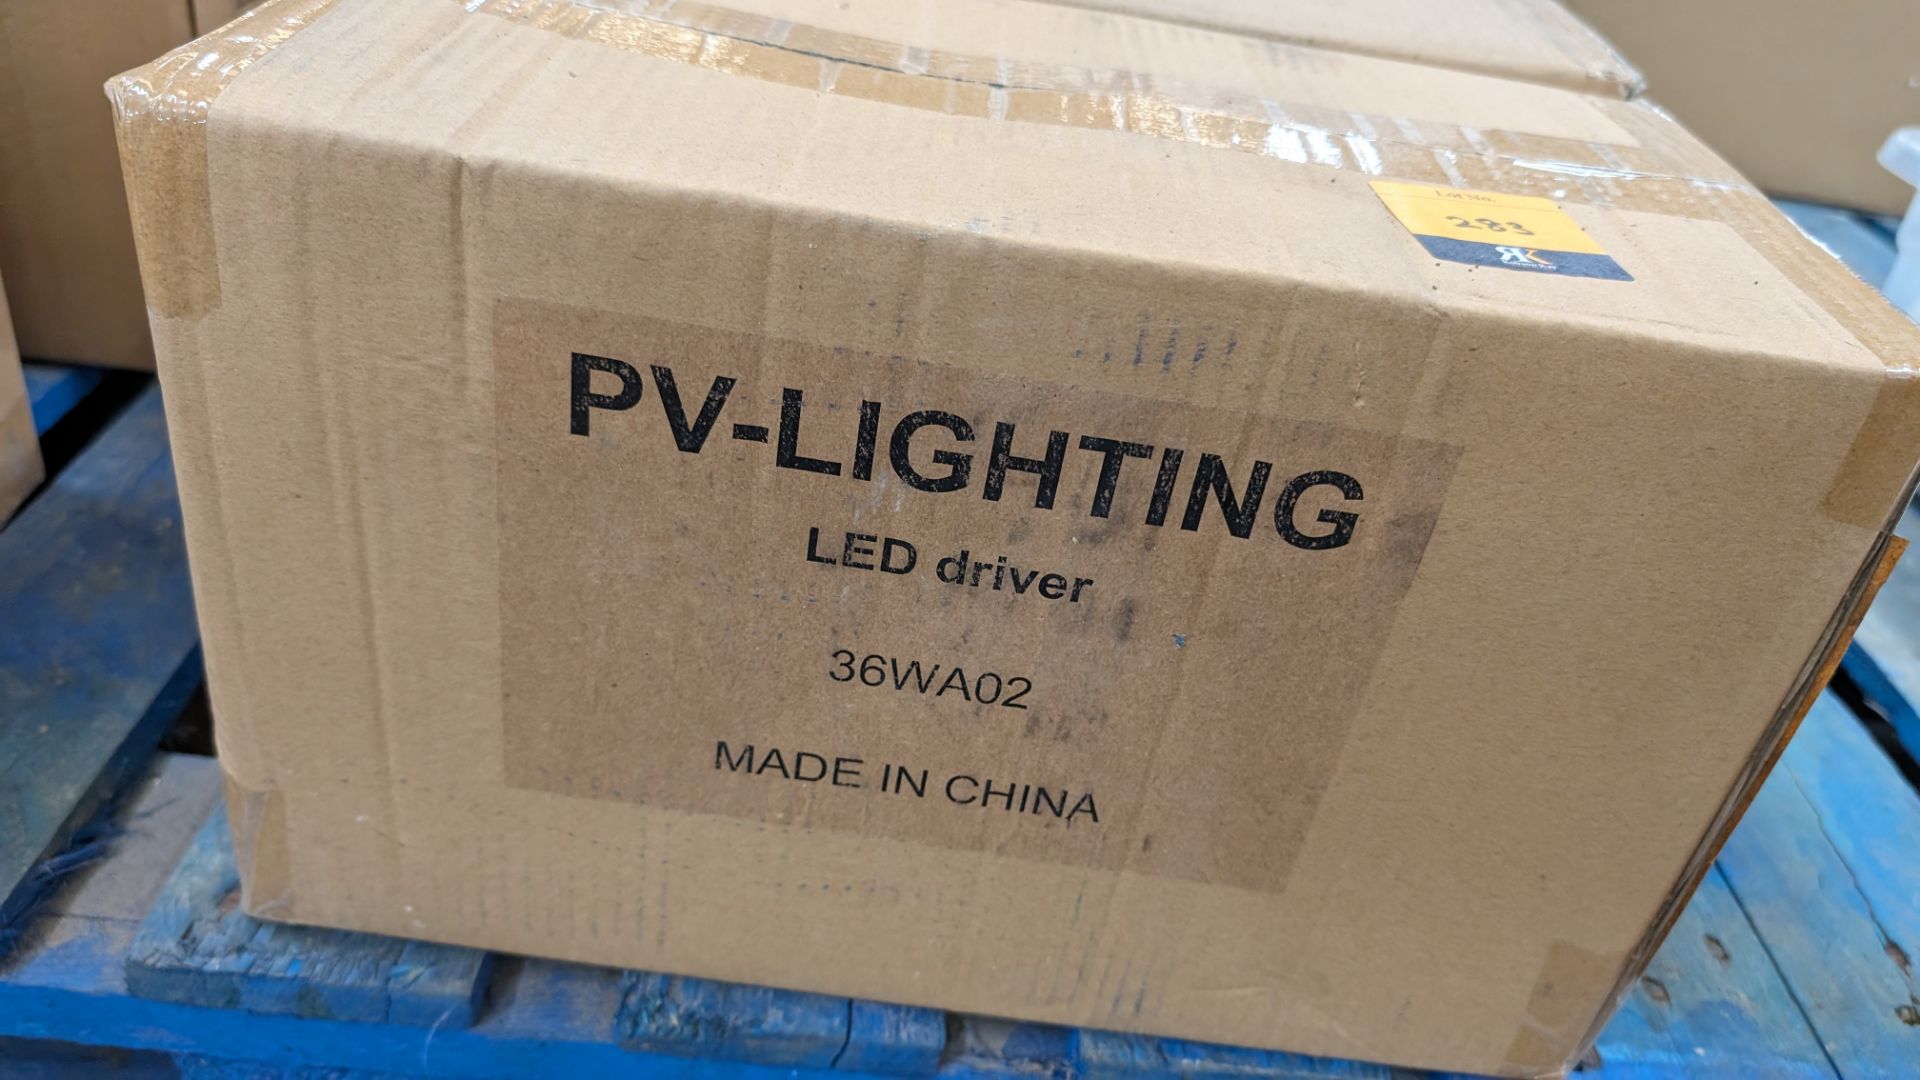 Approximately 288 off LED drivers, model IN-36WA02, 36VDC, 950mA - 4 boxes - Image 3 of 4